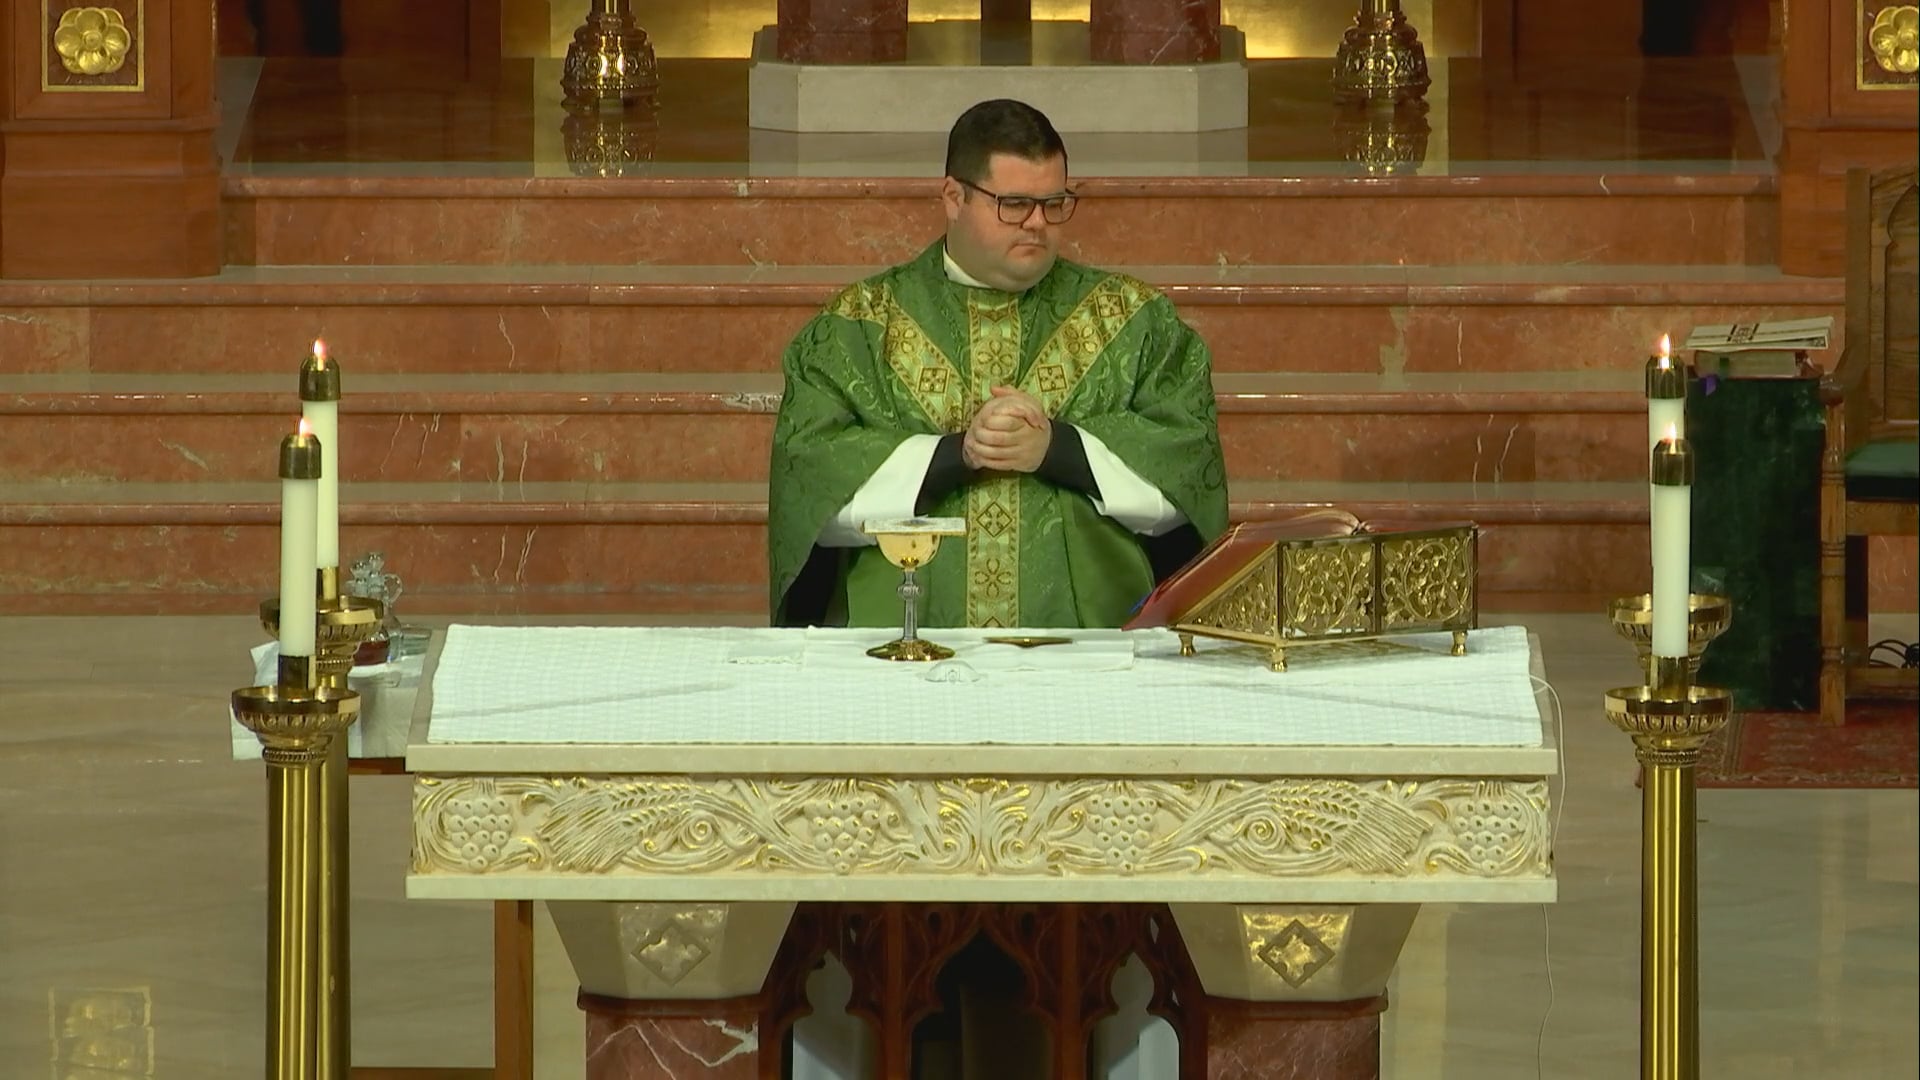 Mass from St. Agnes Cathedral - January 30, 2023